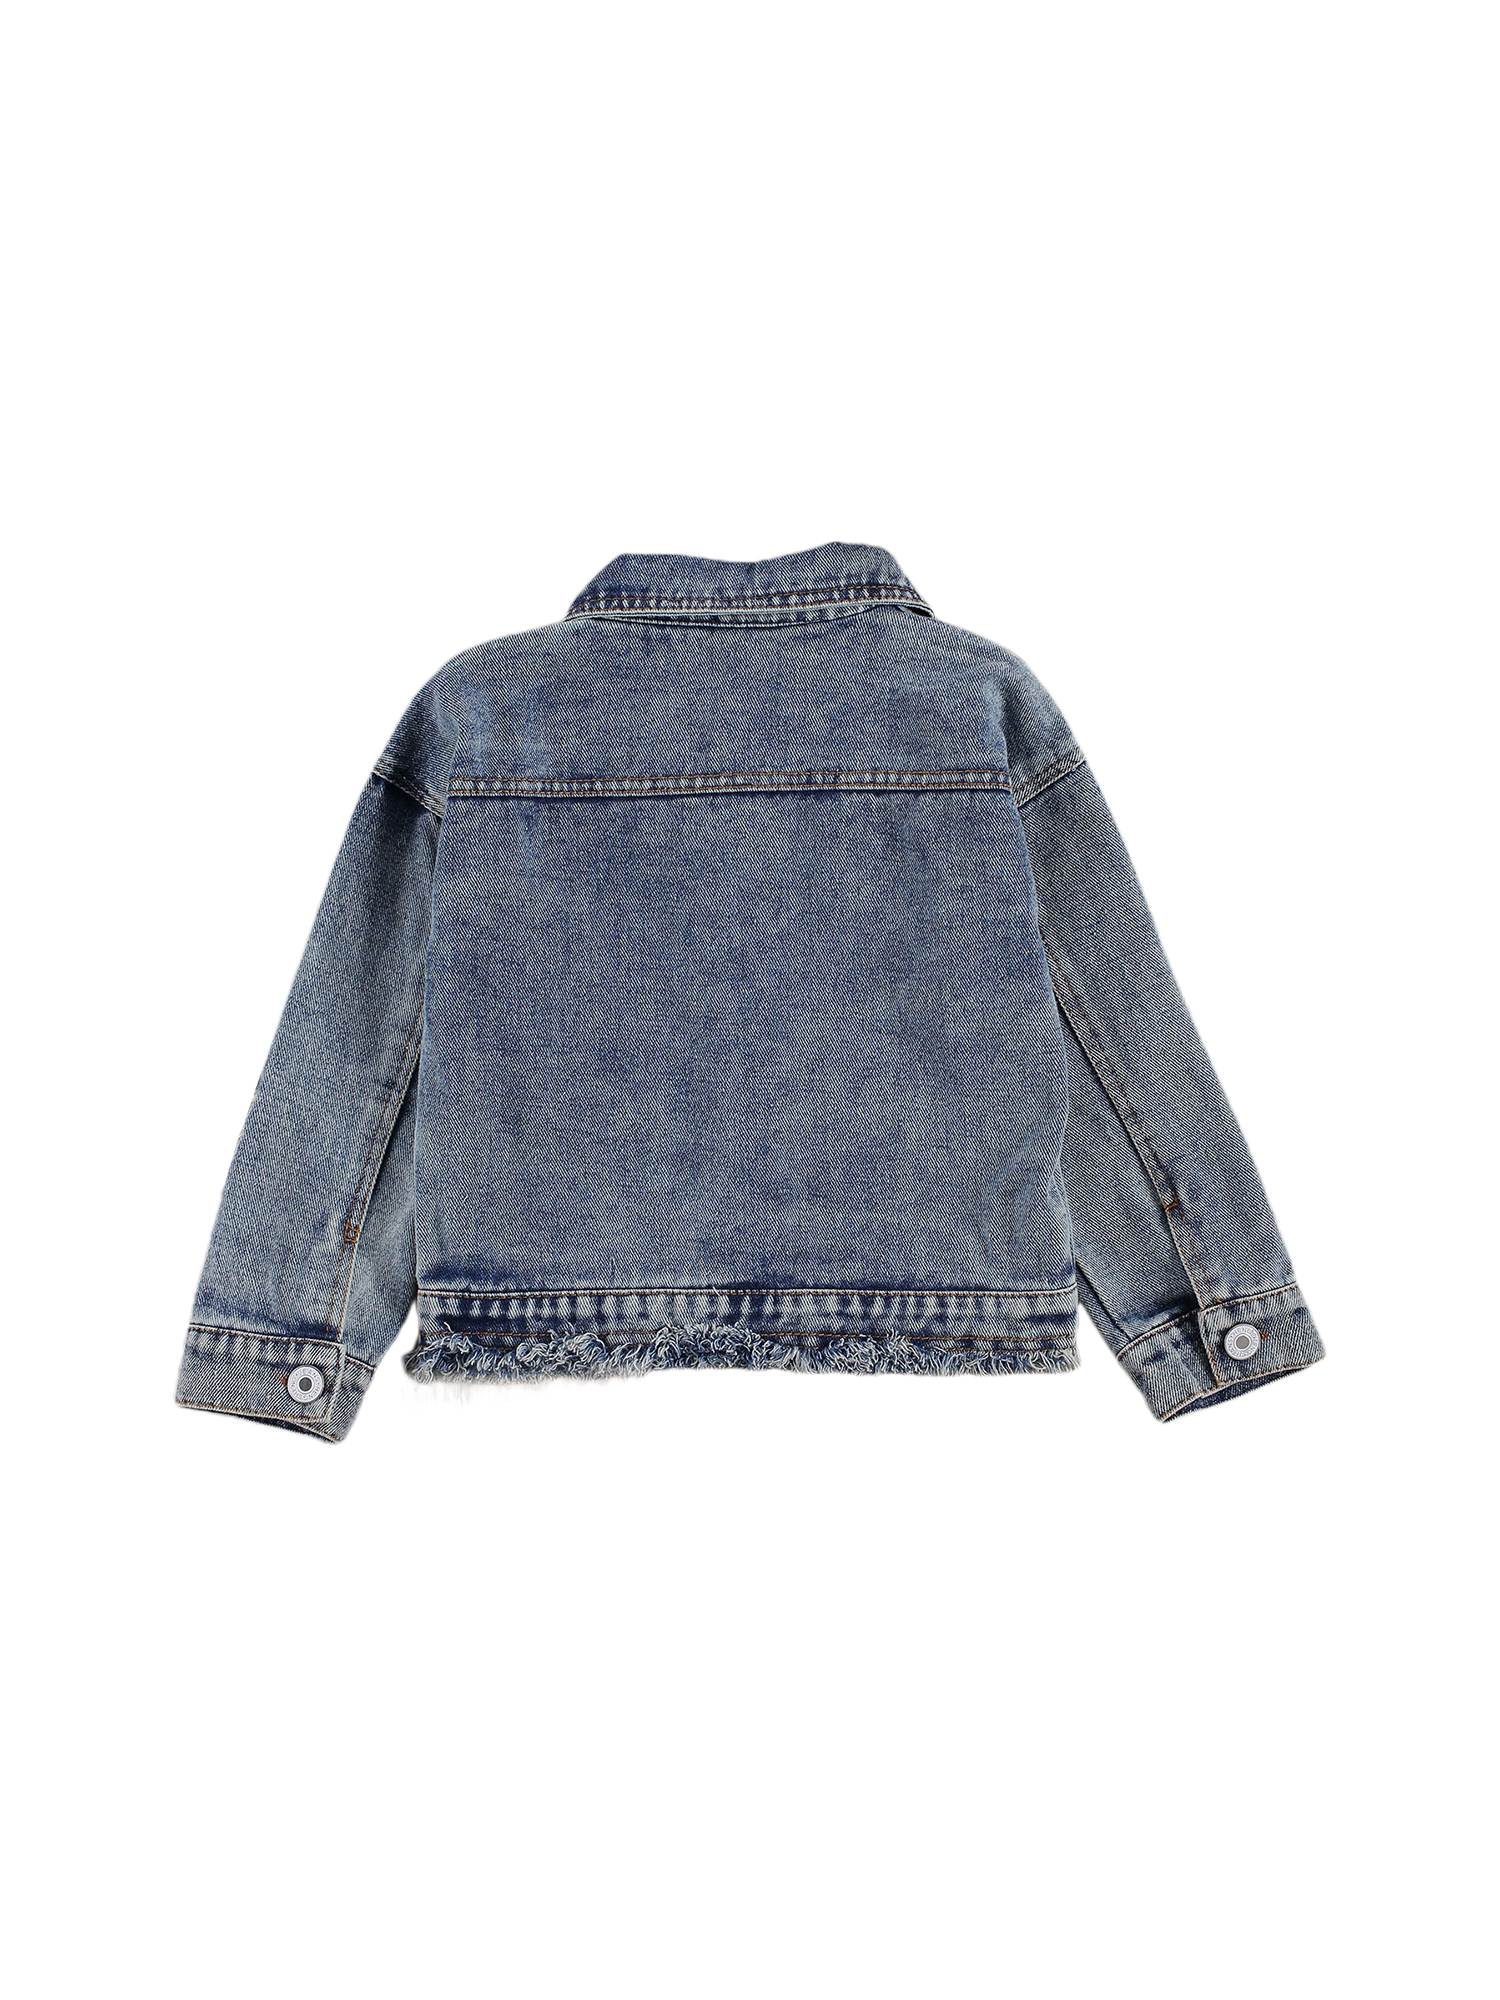 Toddler Baby Girl Coat Long Sleeve Denim Jacket Sequin Pockets Ripped Jean Jacket Outwear 1-6T - image 3 of 10